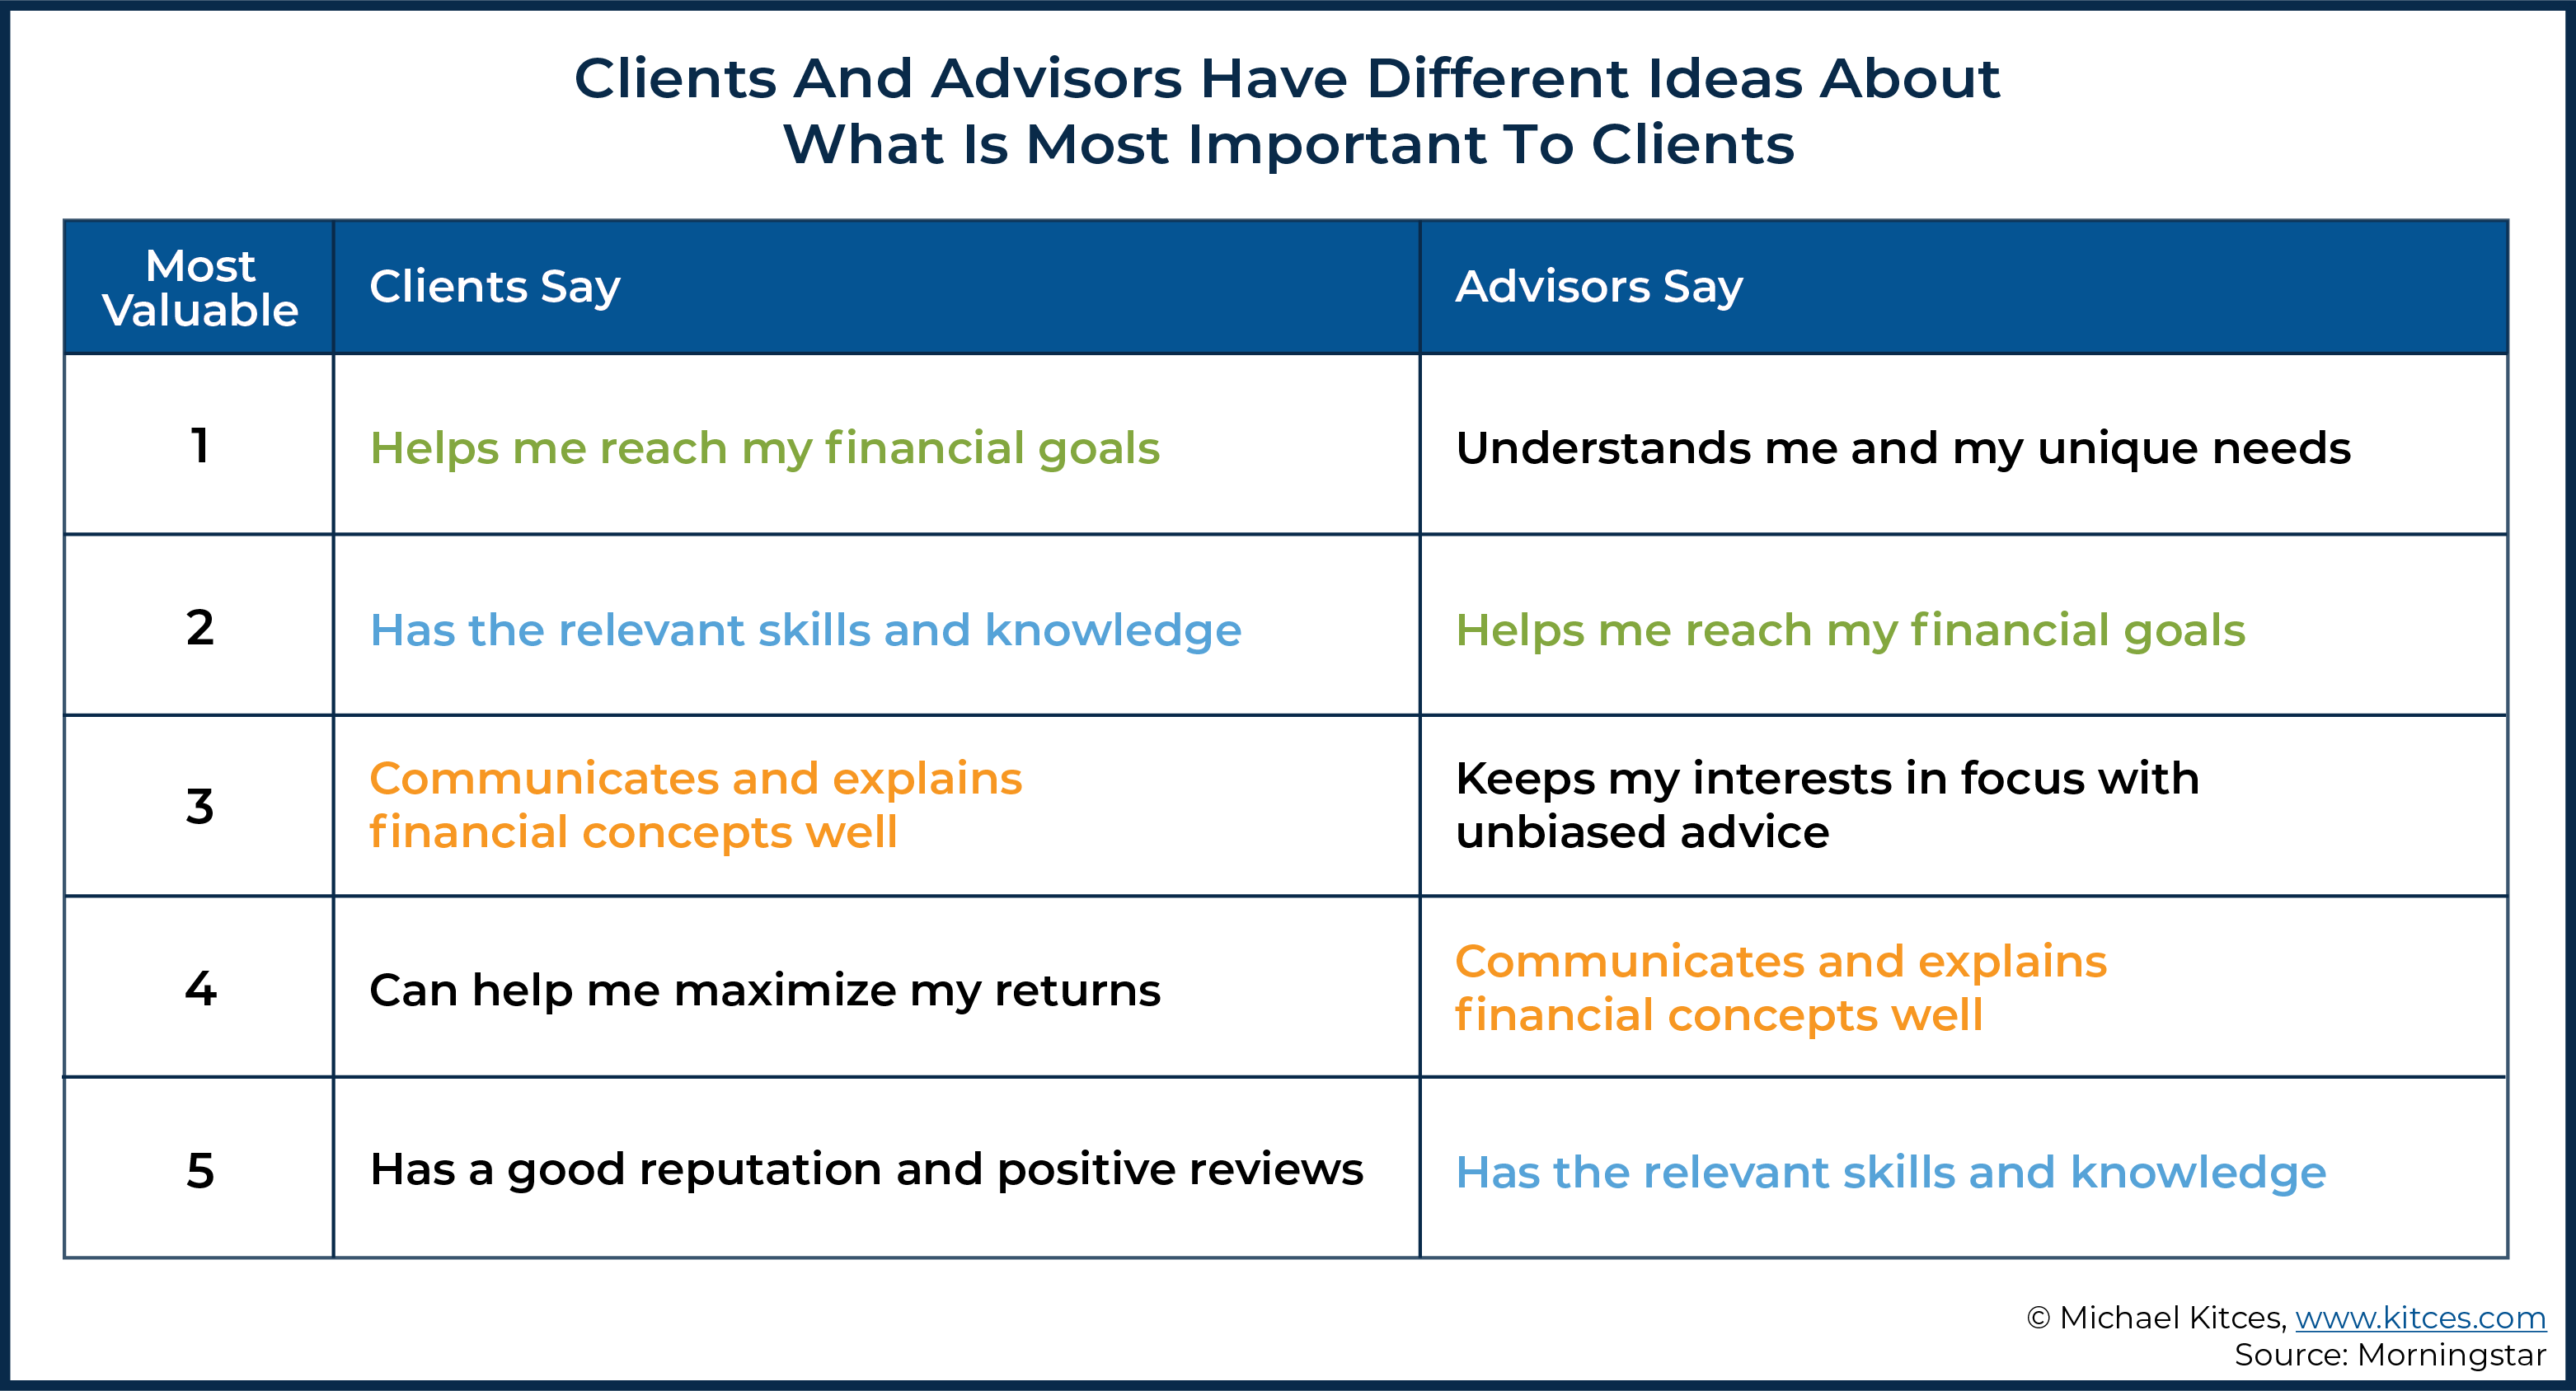 Clients And Advisors Have Different Ideas About What Is Most Important To Clients